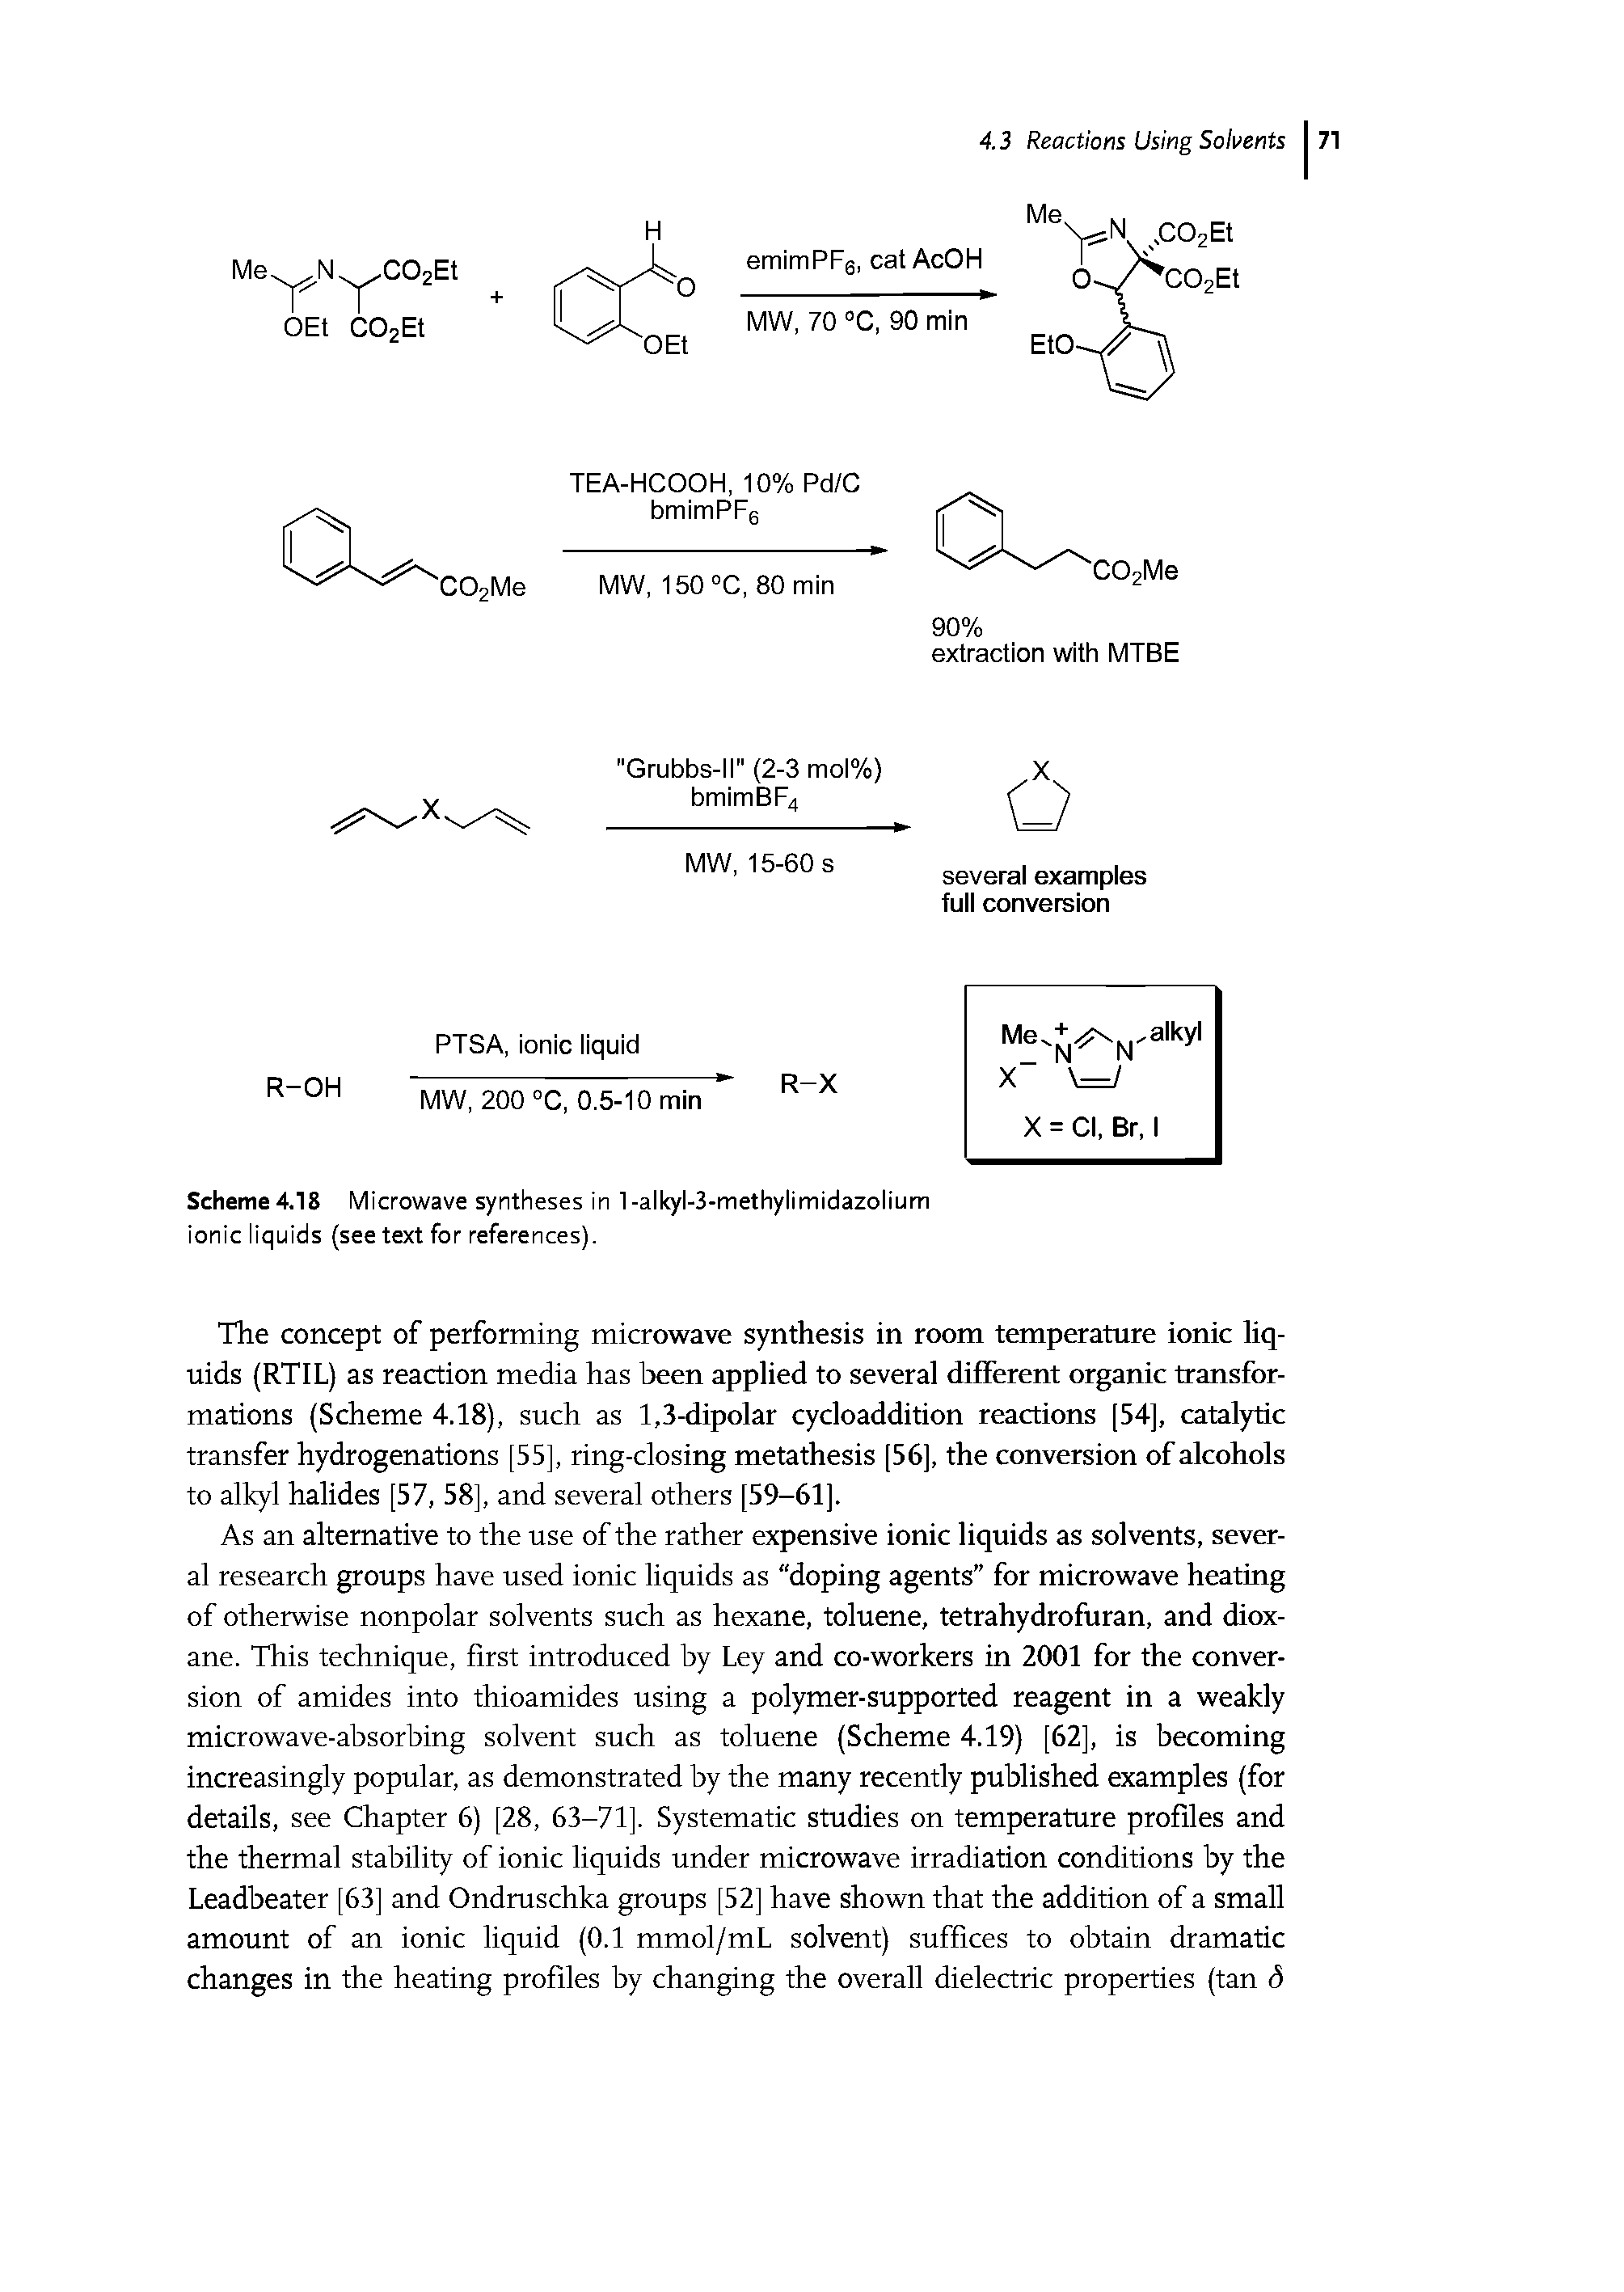 Scheme 4.18 Microwave syntheses in l-alkyl-3-methylimidazolium ionic liquids (see text for references).